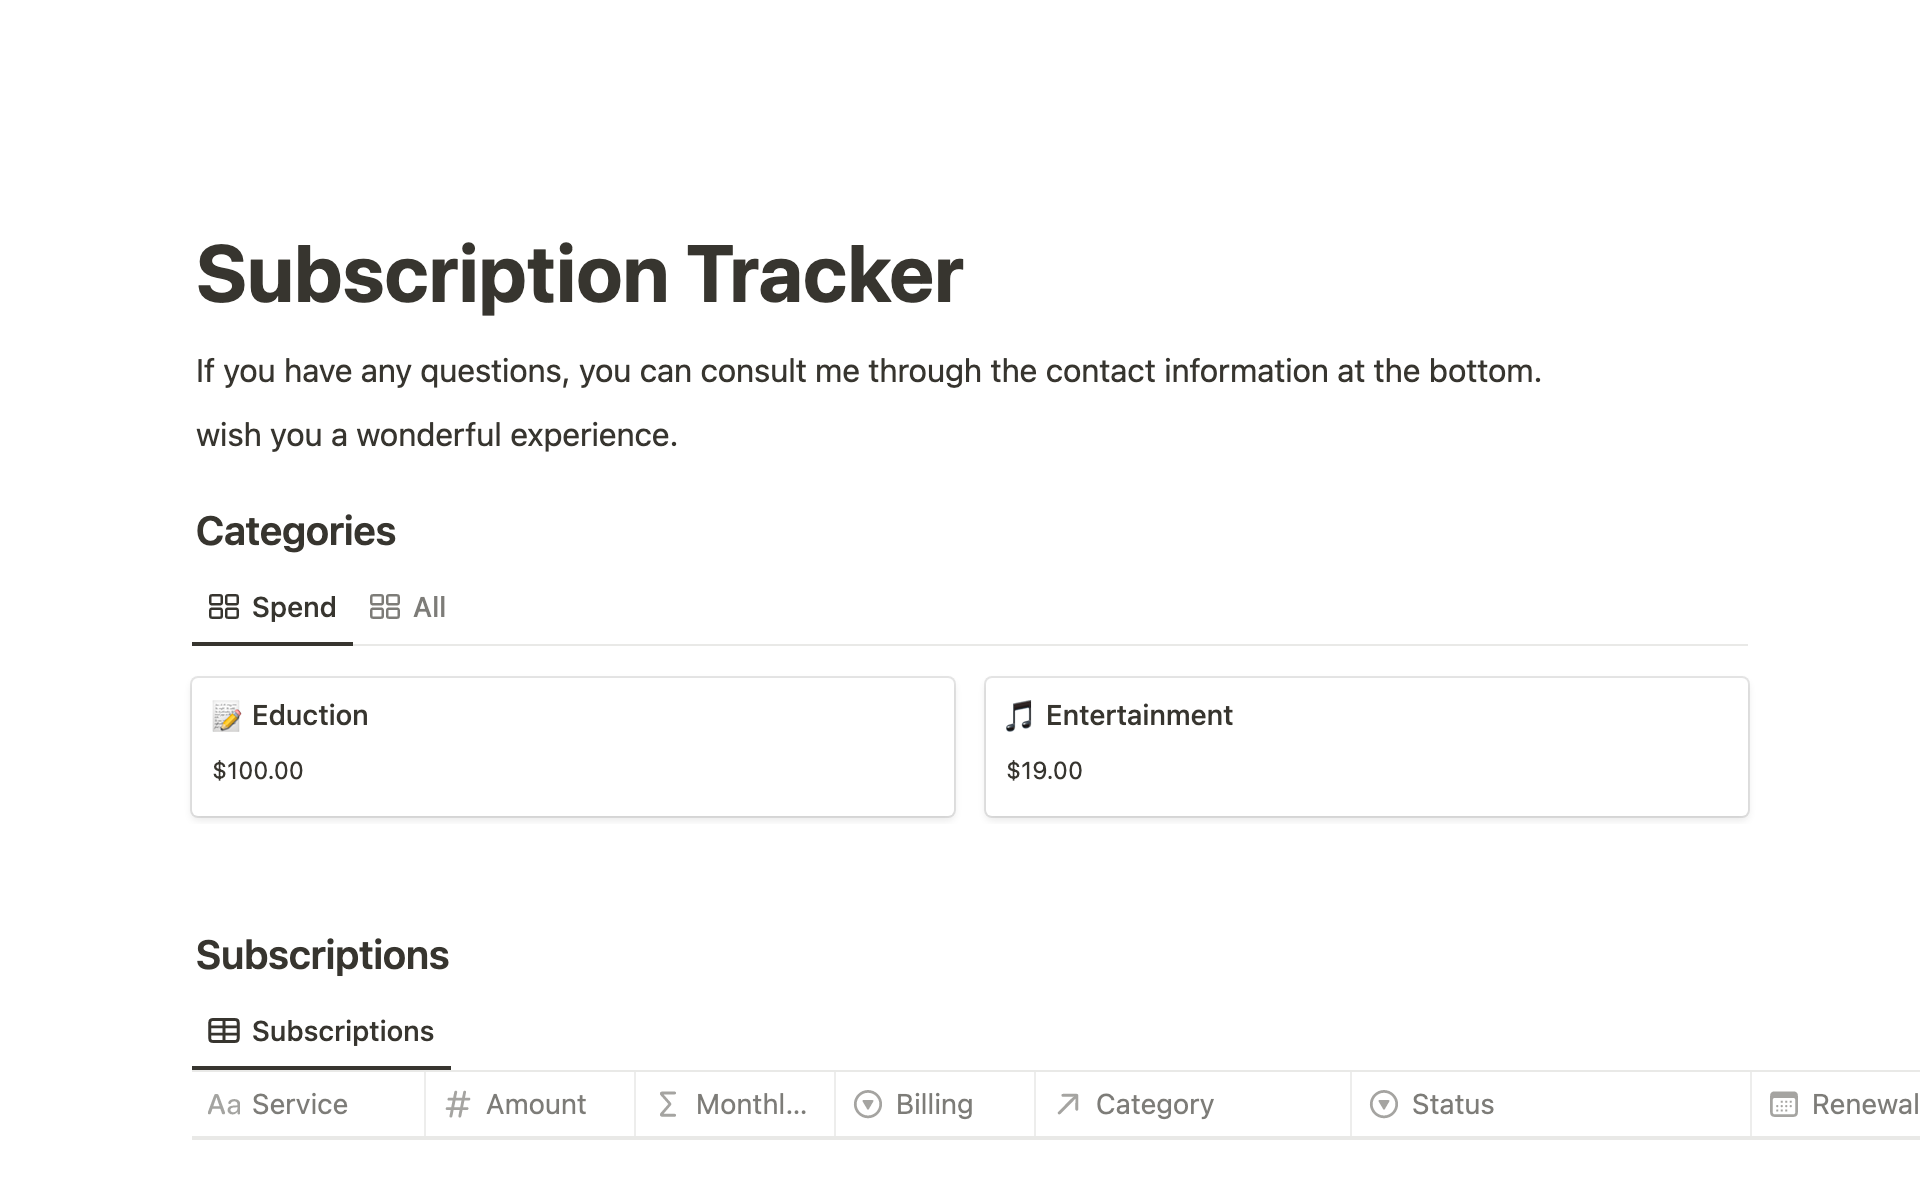 Easily record your subscription information